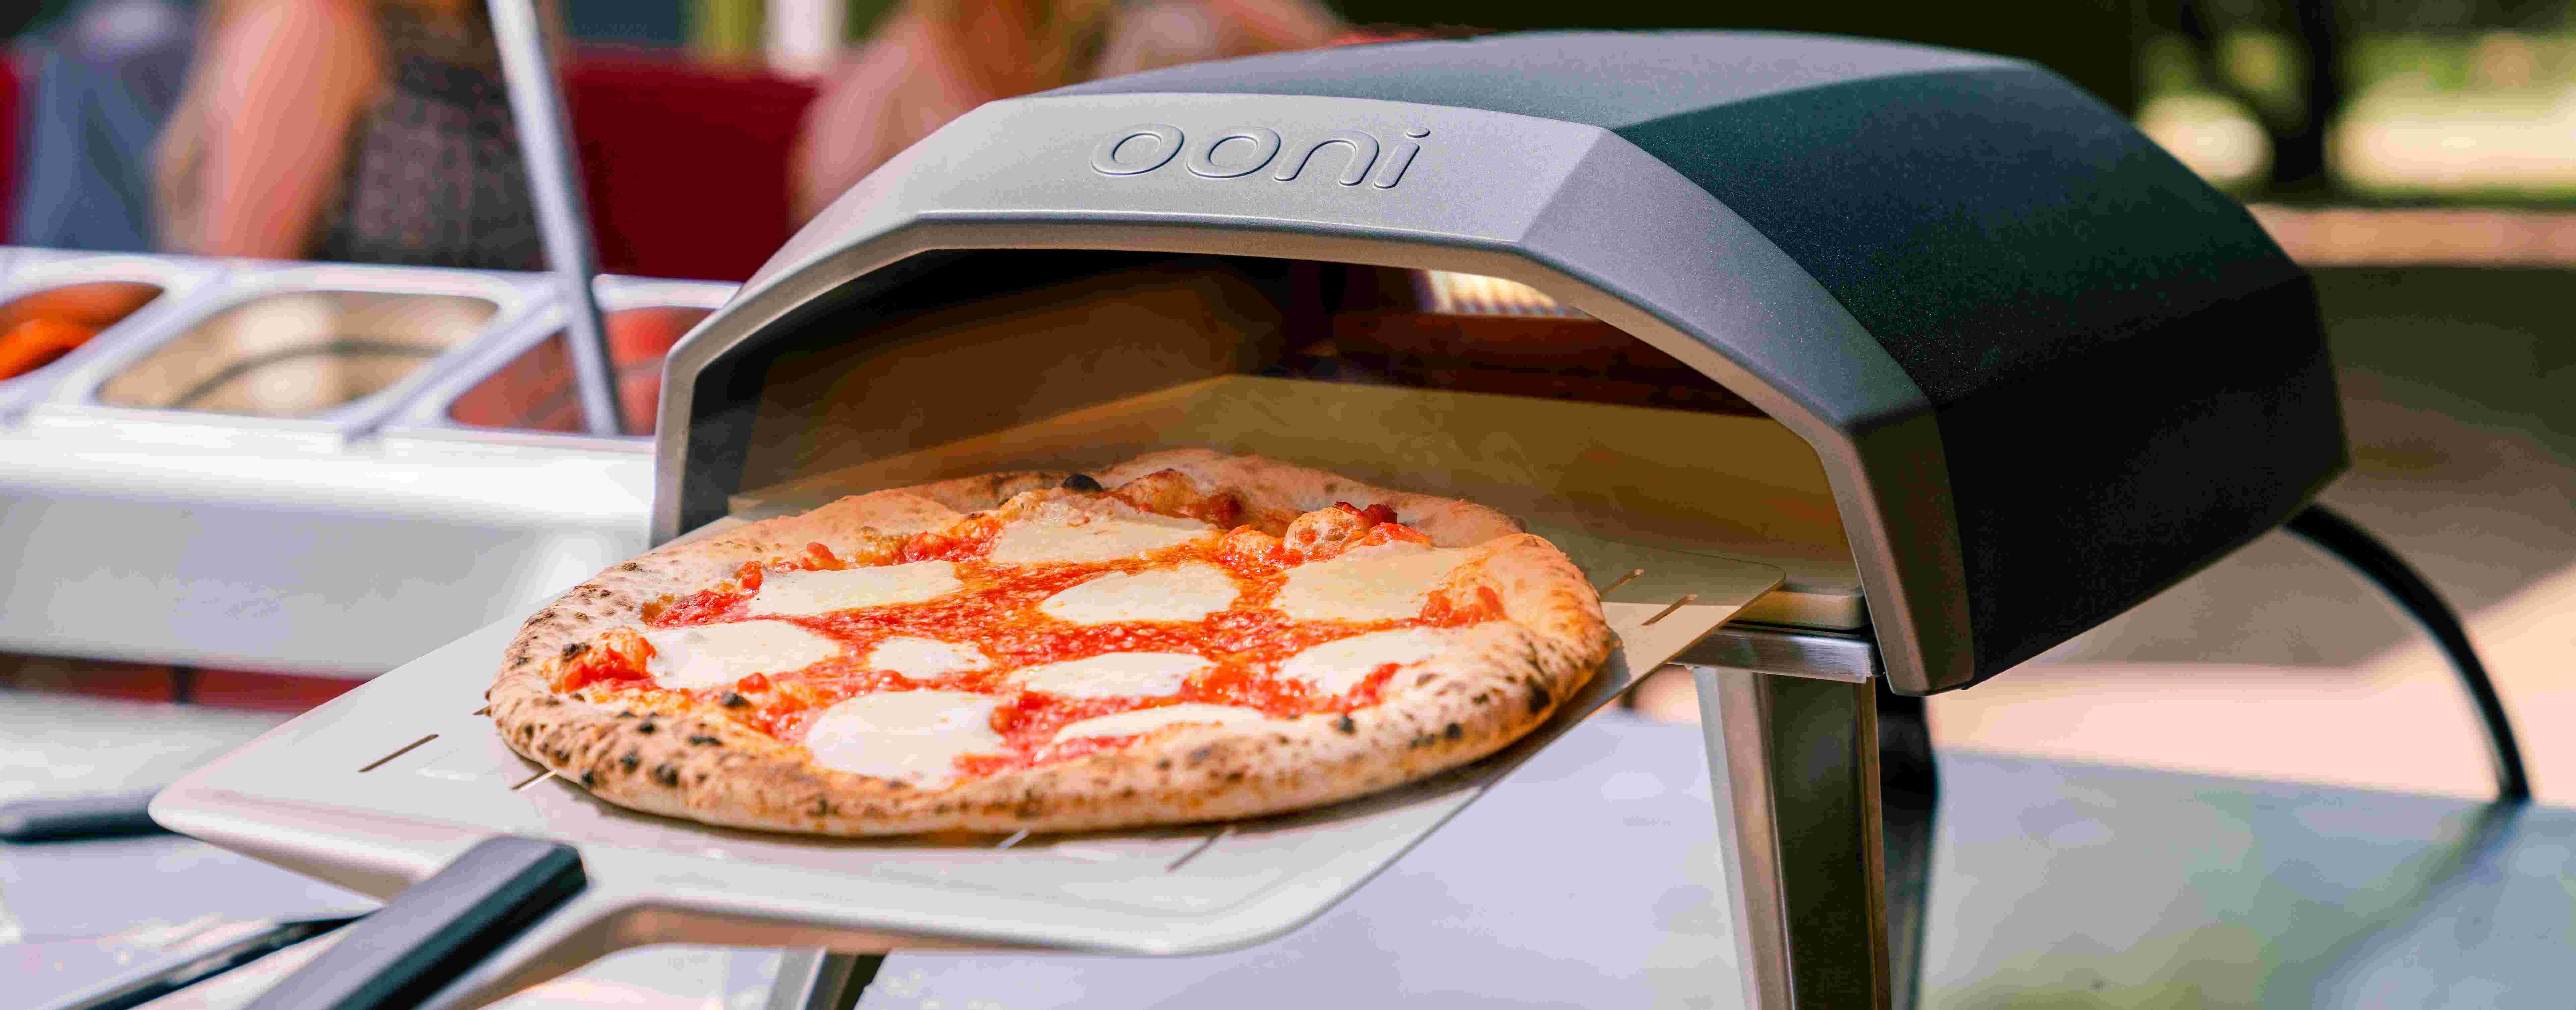 Ooni Pizza Ovens, Emigh Ace Hardware